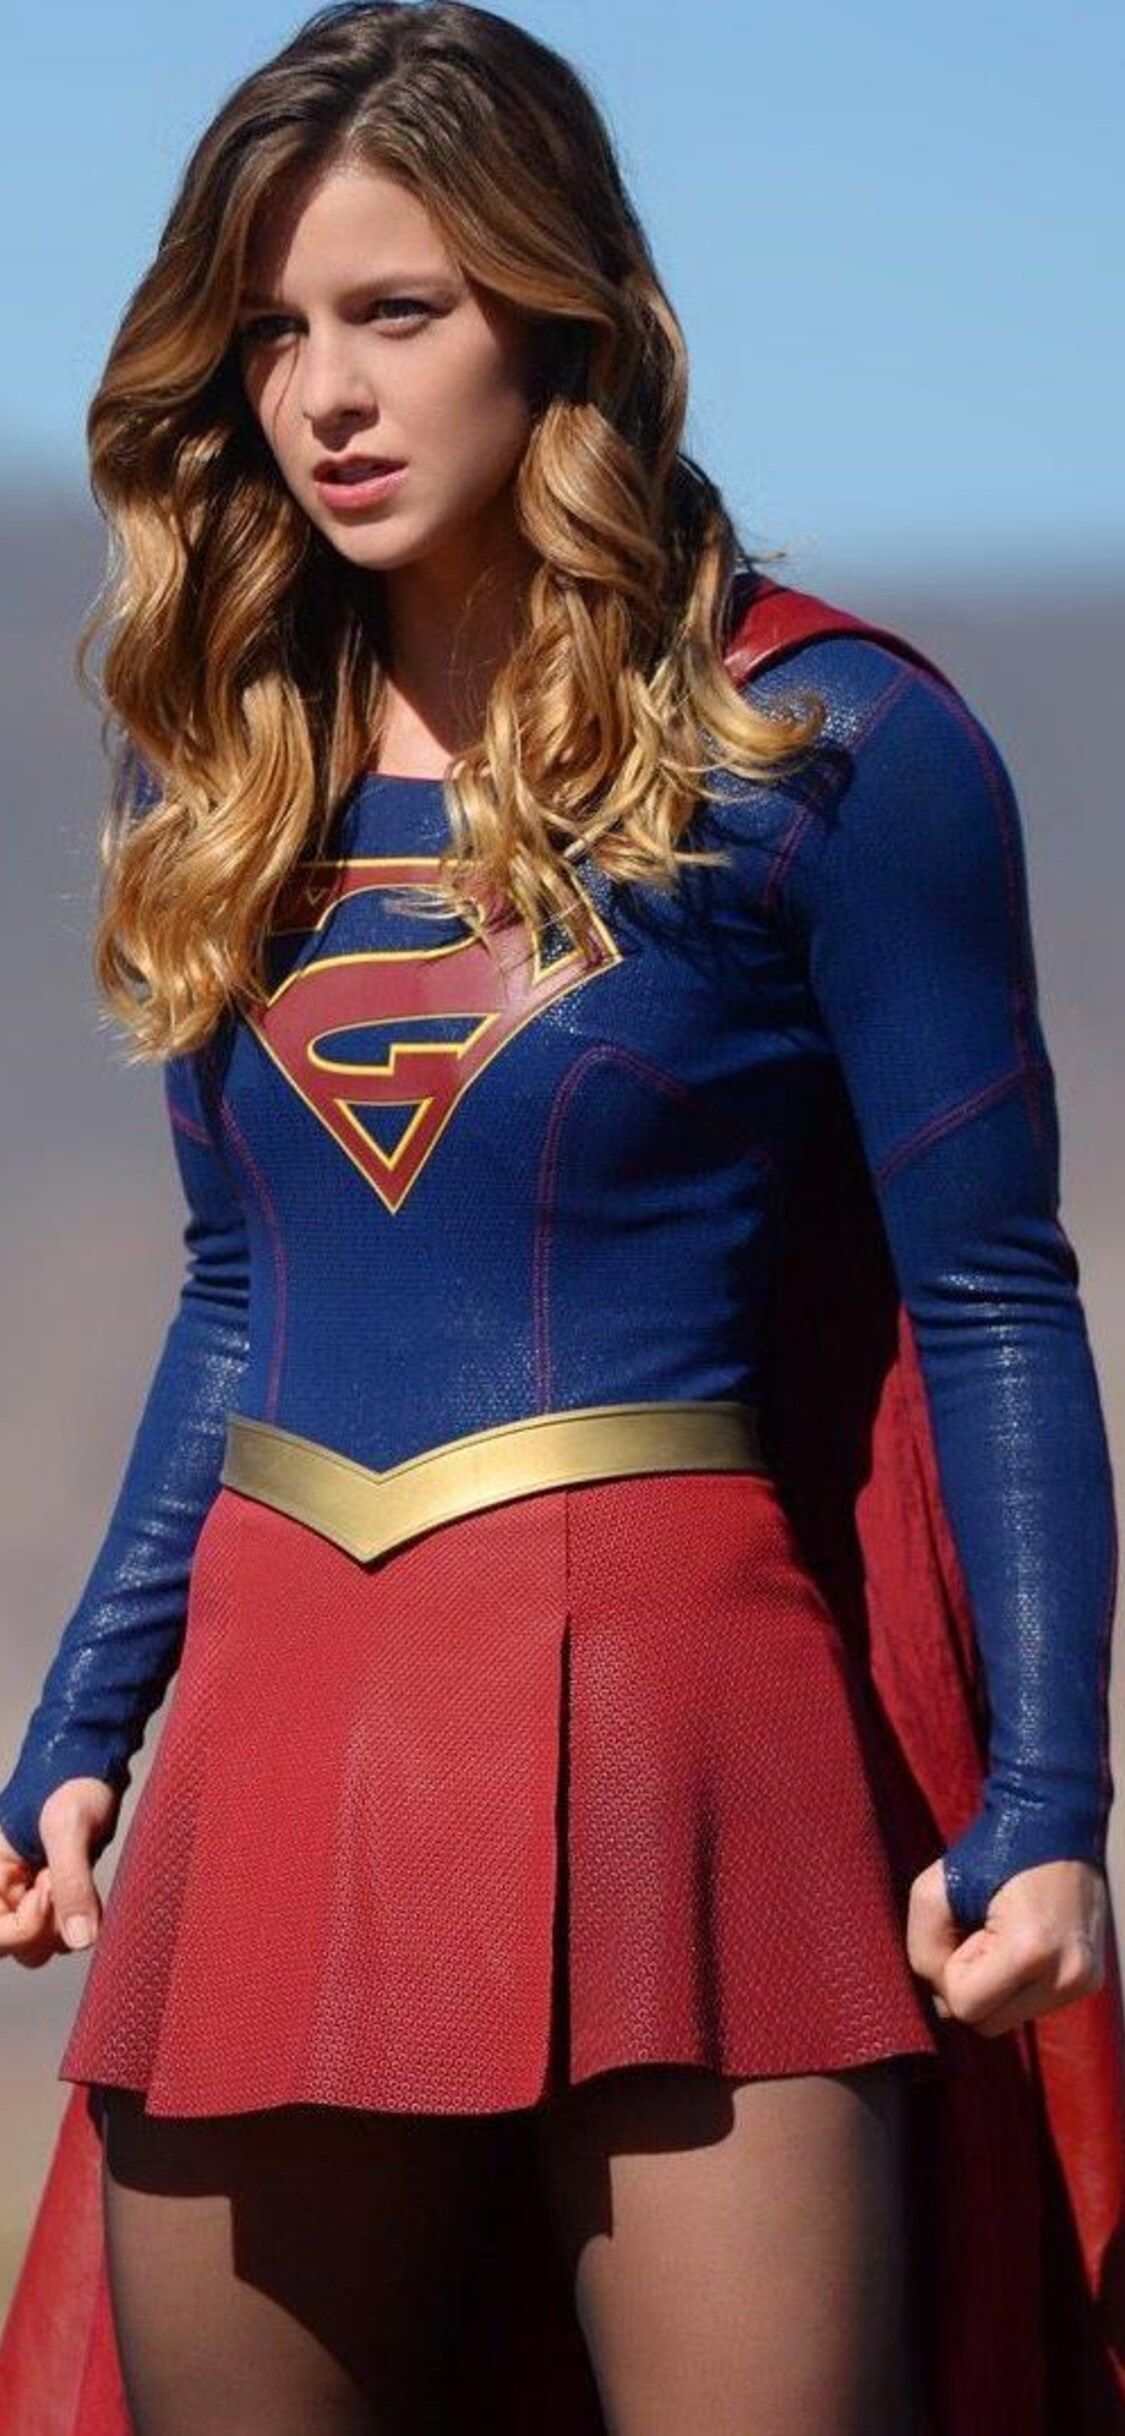 Kara Danvers Supergirl iPhone XS, iPhone iPhone X HD 4k Wallpaper, Image, Background, Photo and Picture